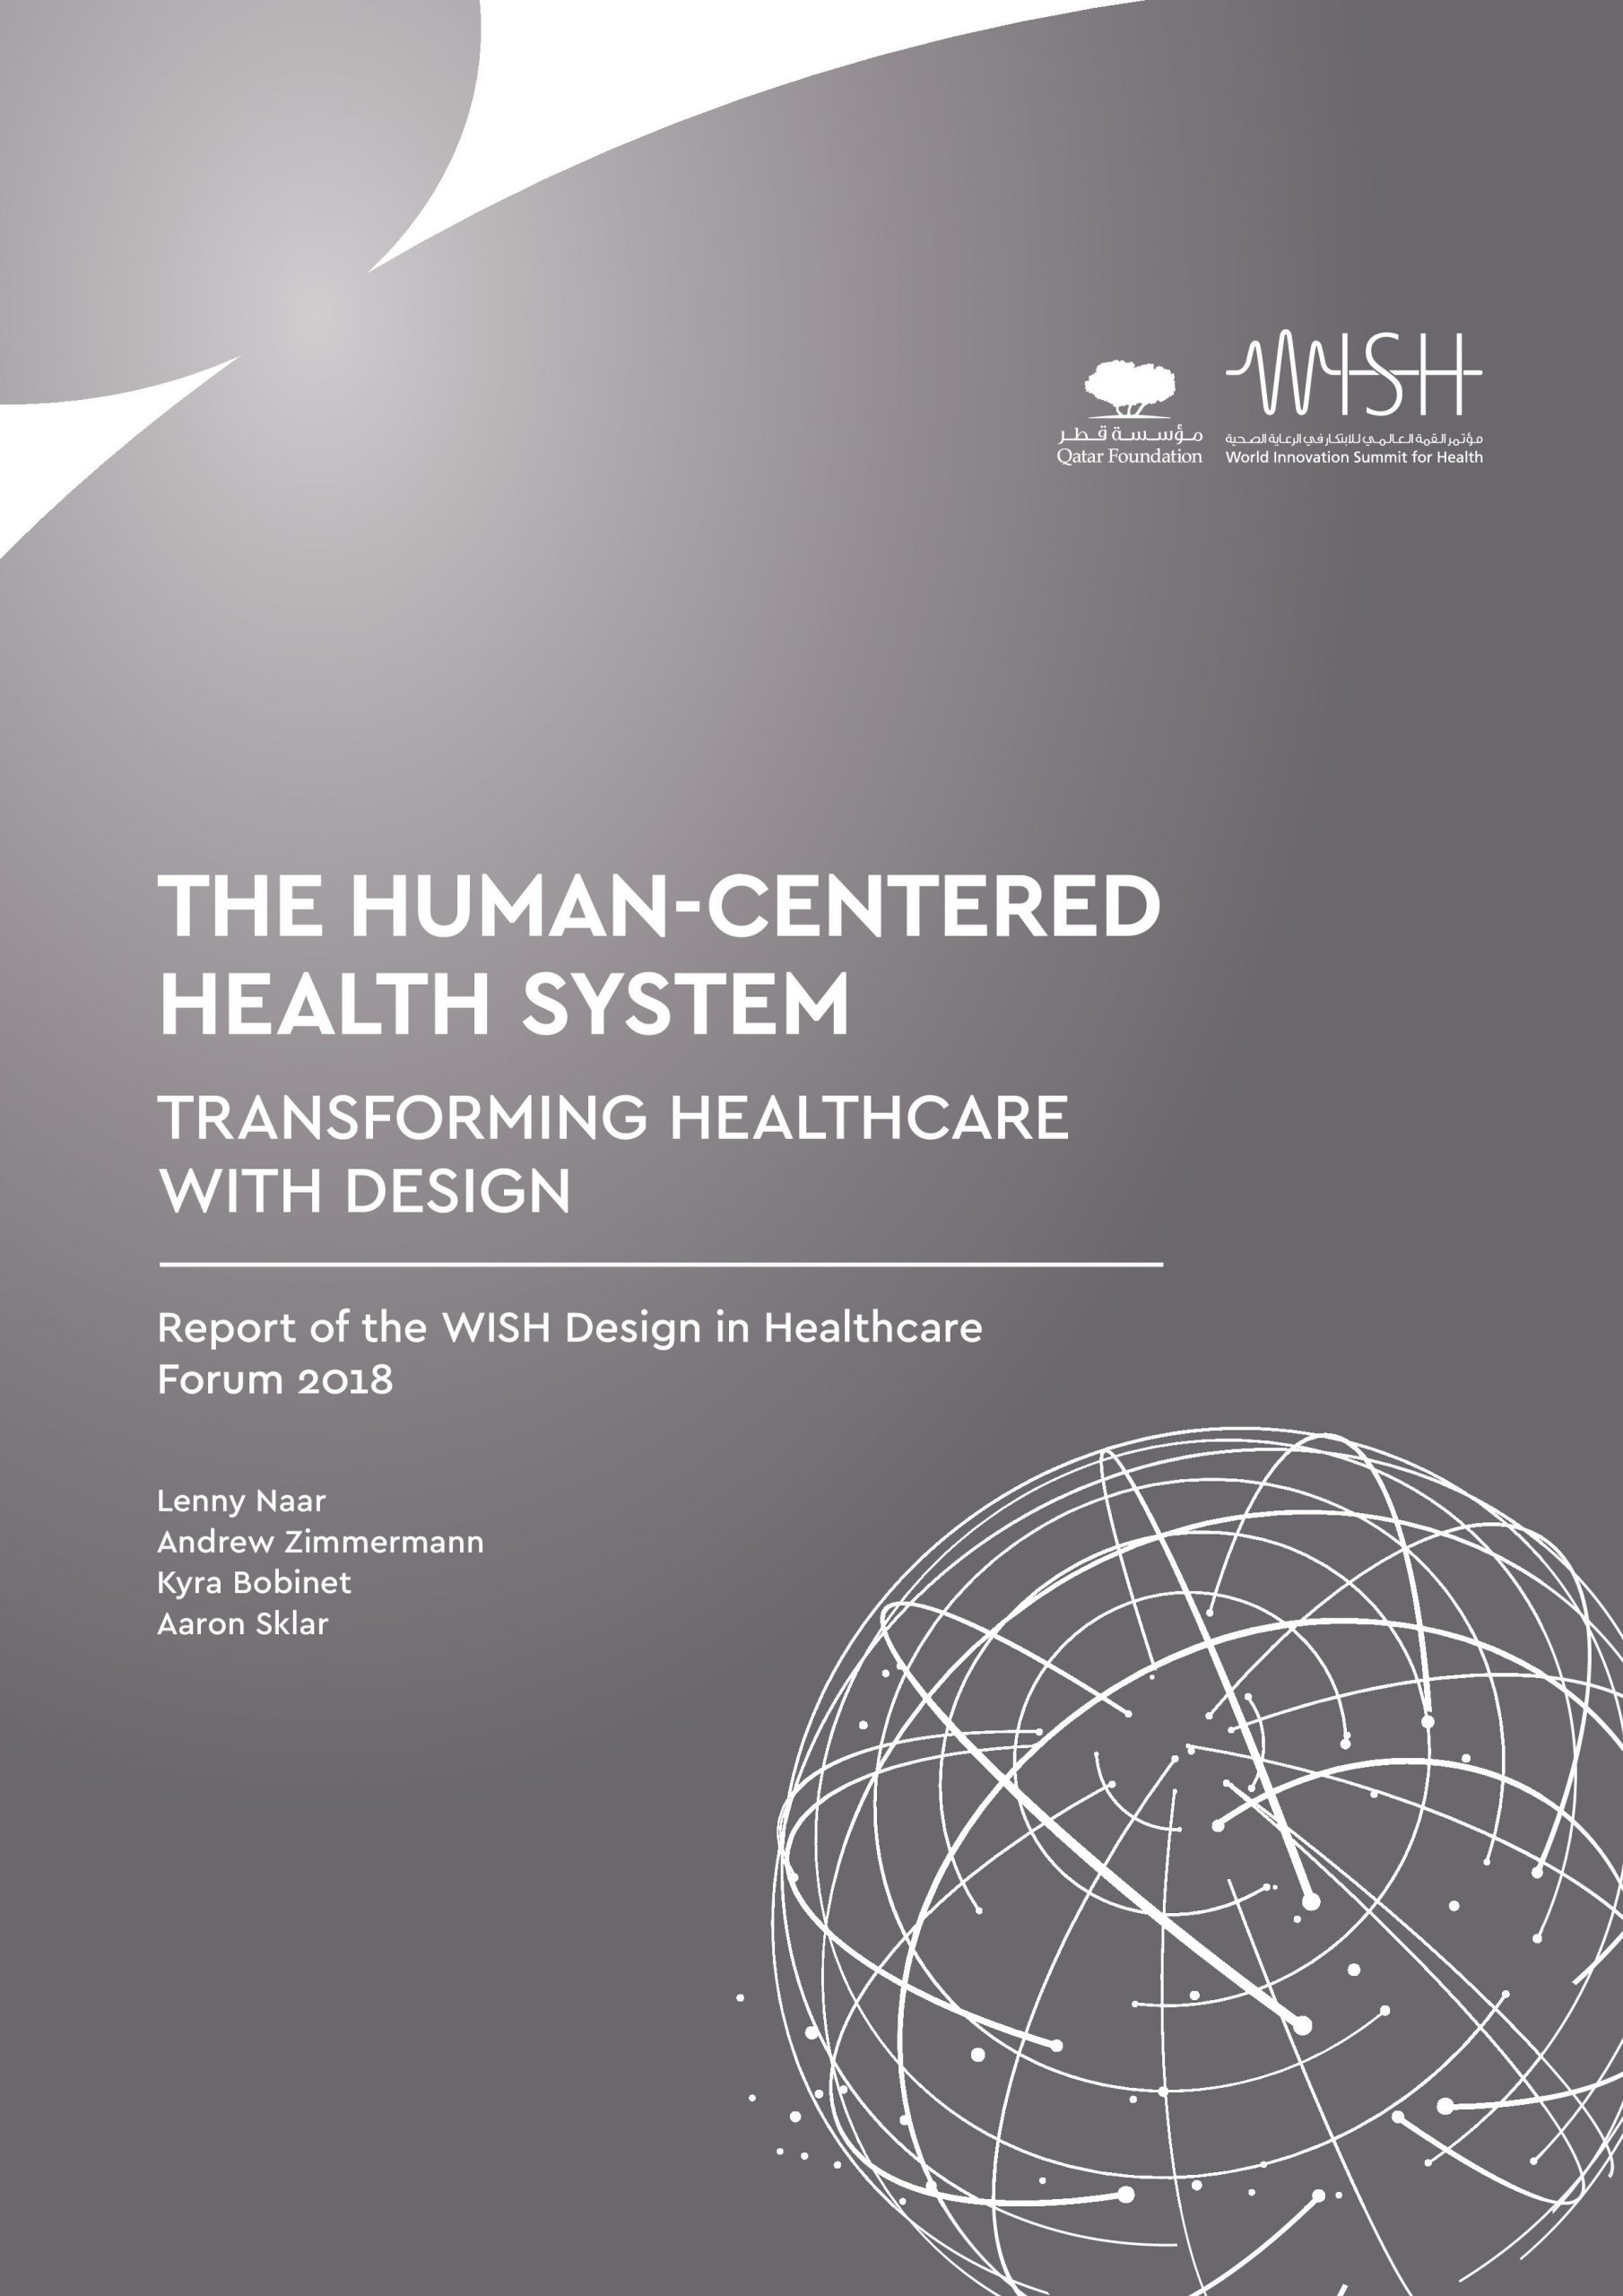 The Human-Centered Health System: Transforming Healthcare with Design